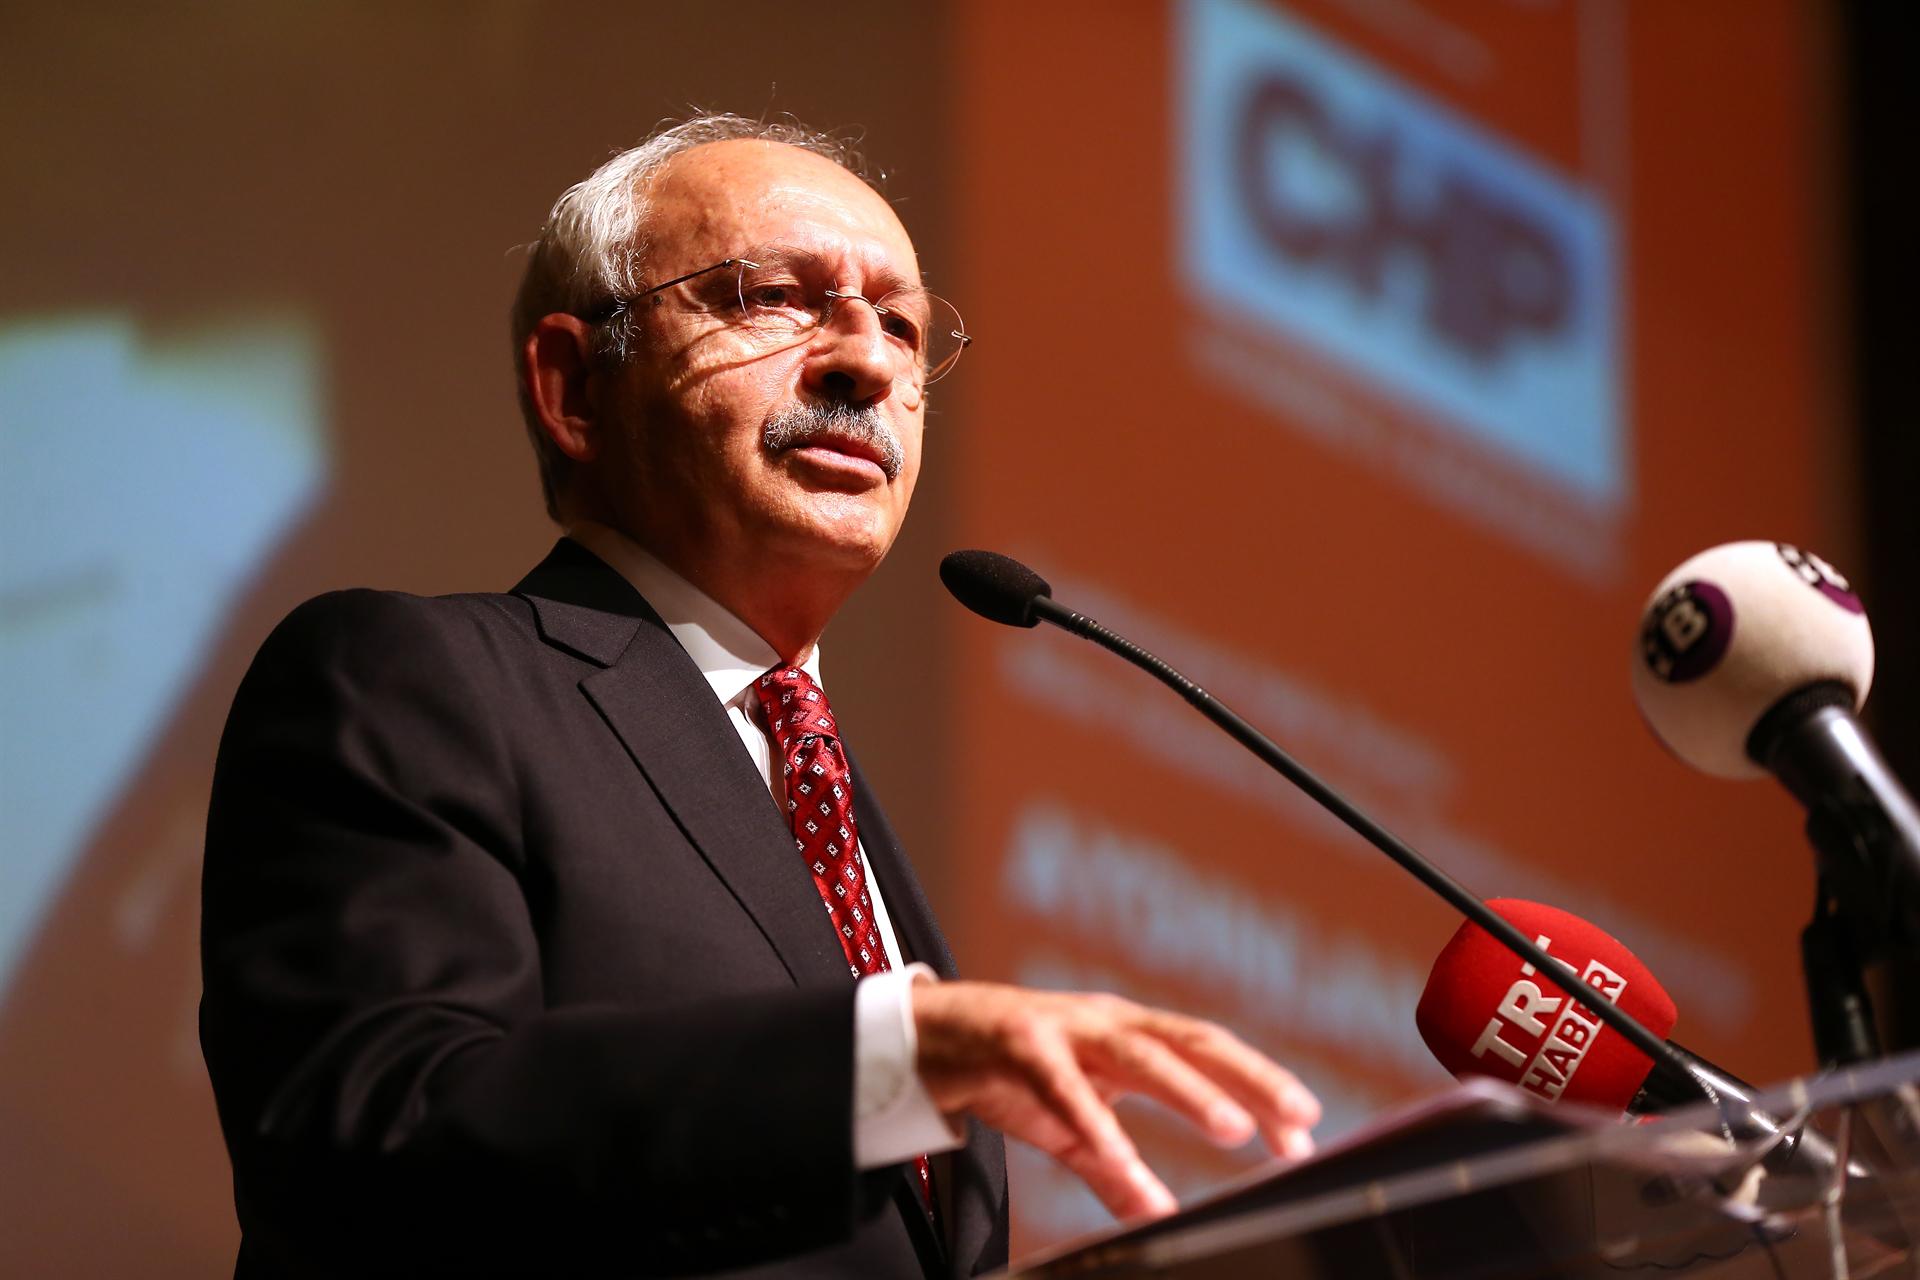 CHP leader cites seven problems in Middle East